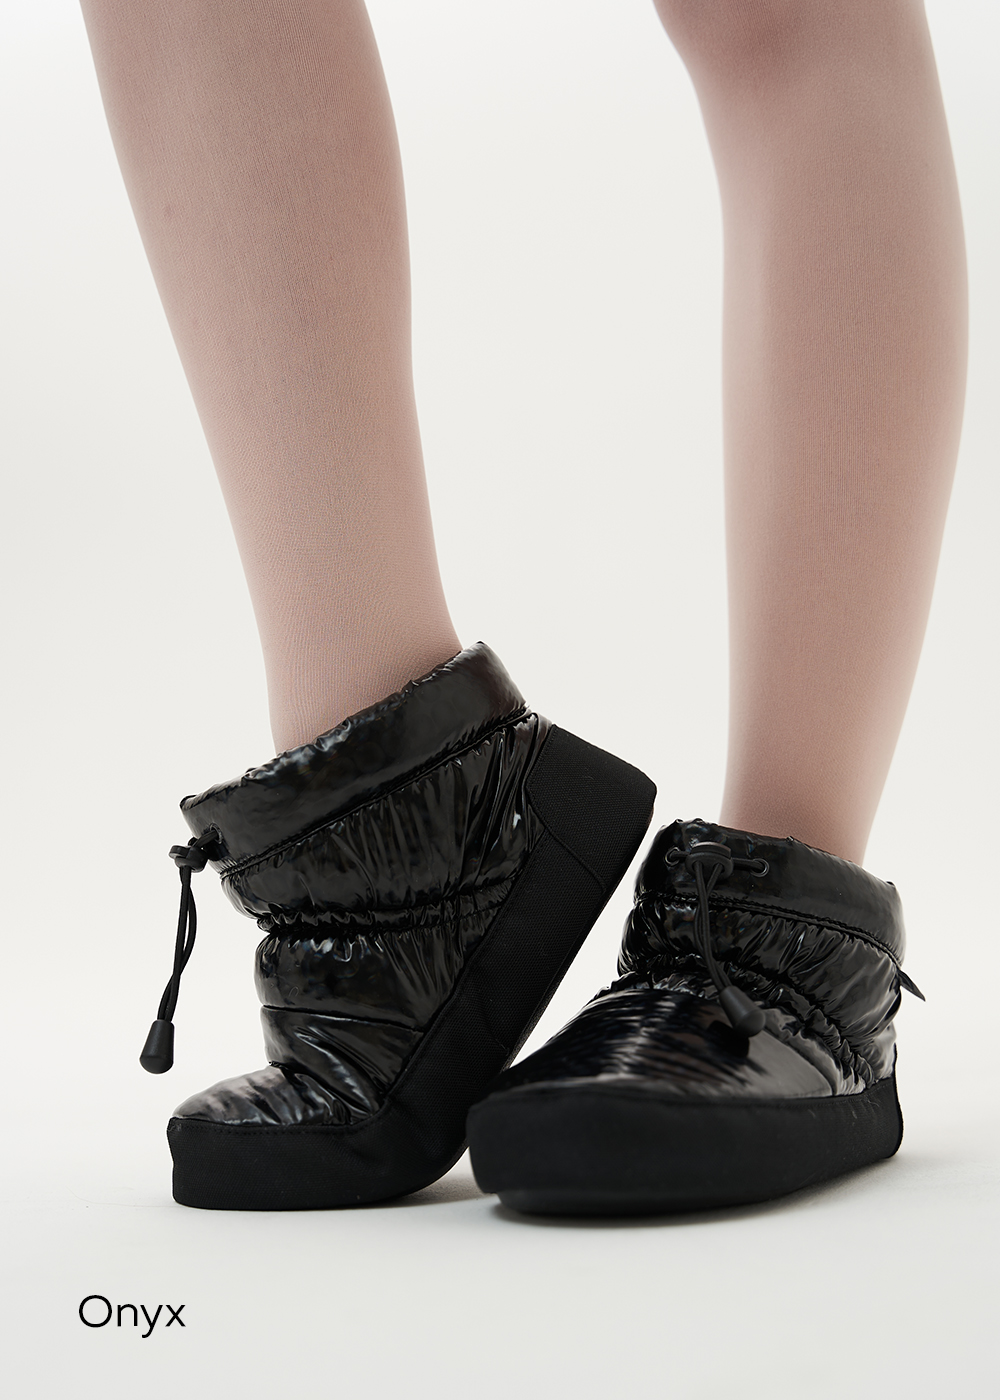 M-75 Warm-up booties (M-75)  Grishko® Buy online the best ballet products.  Order now!